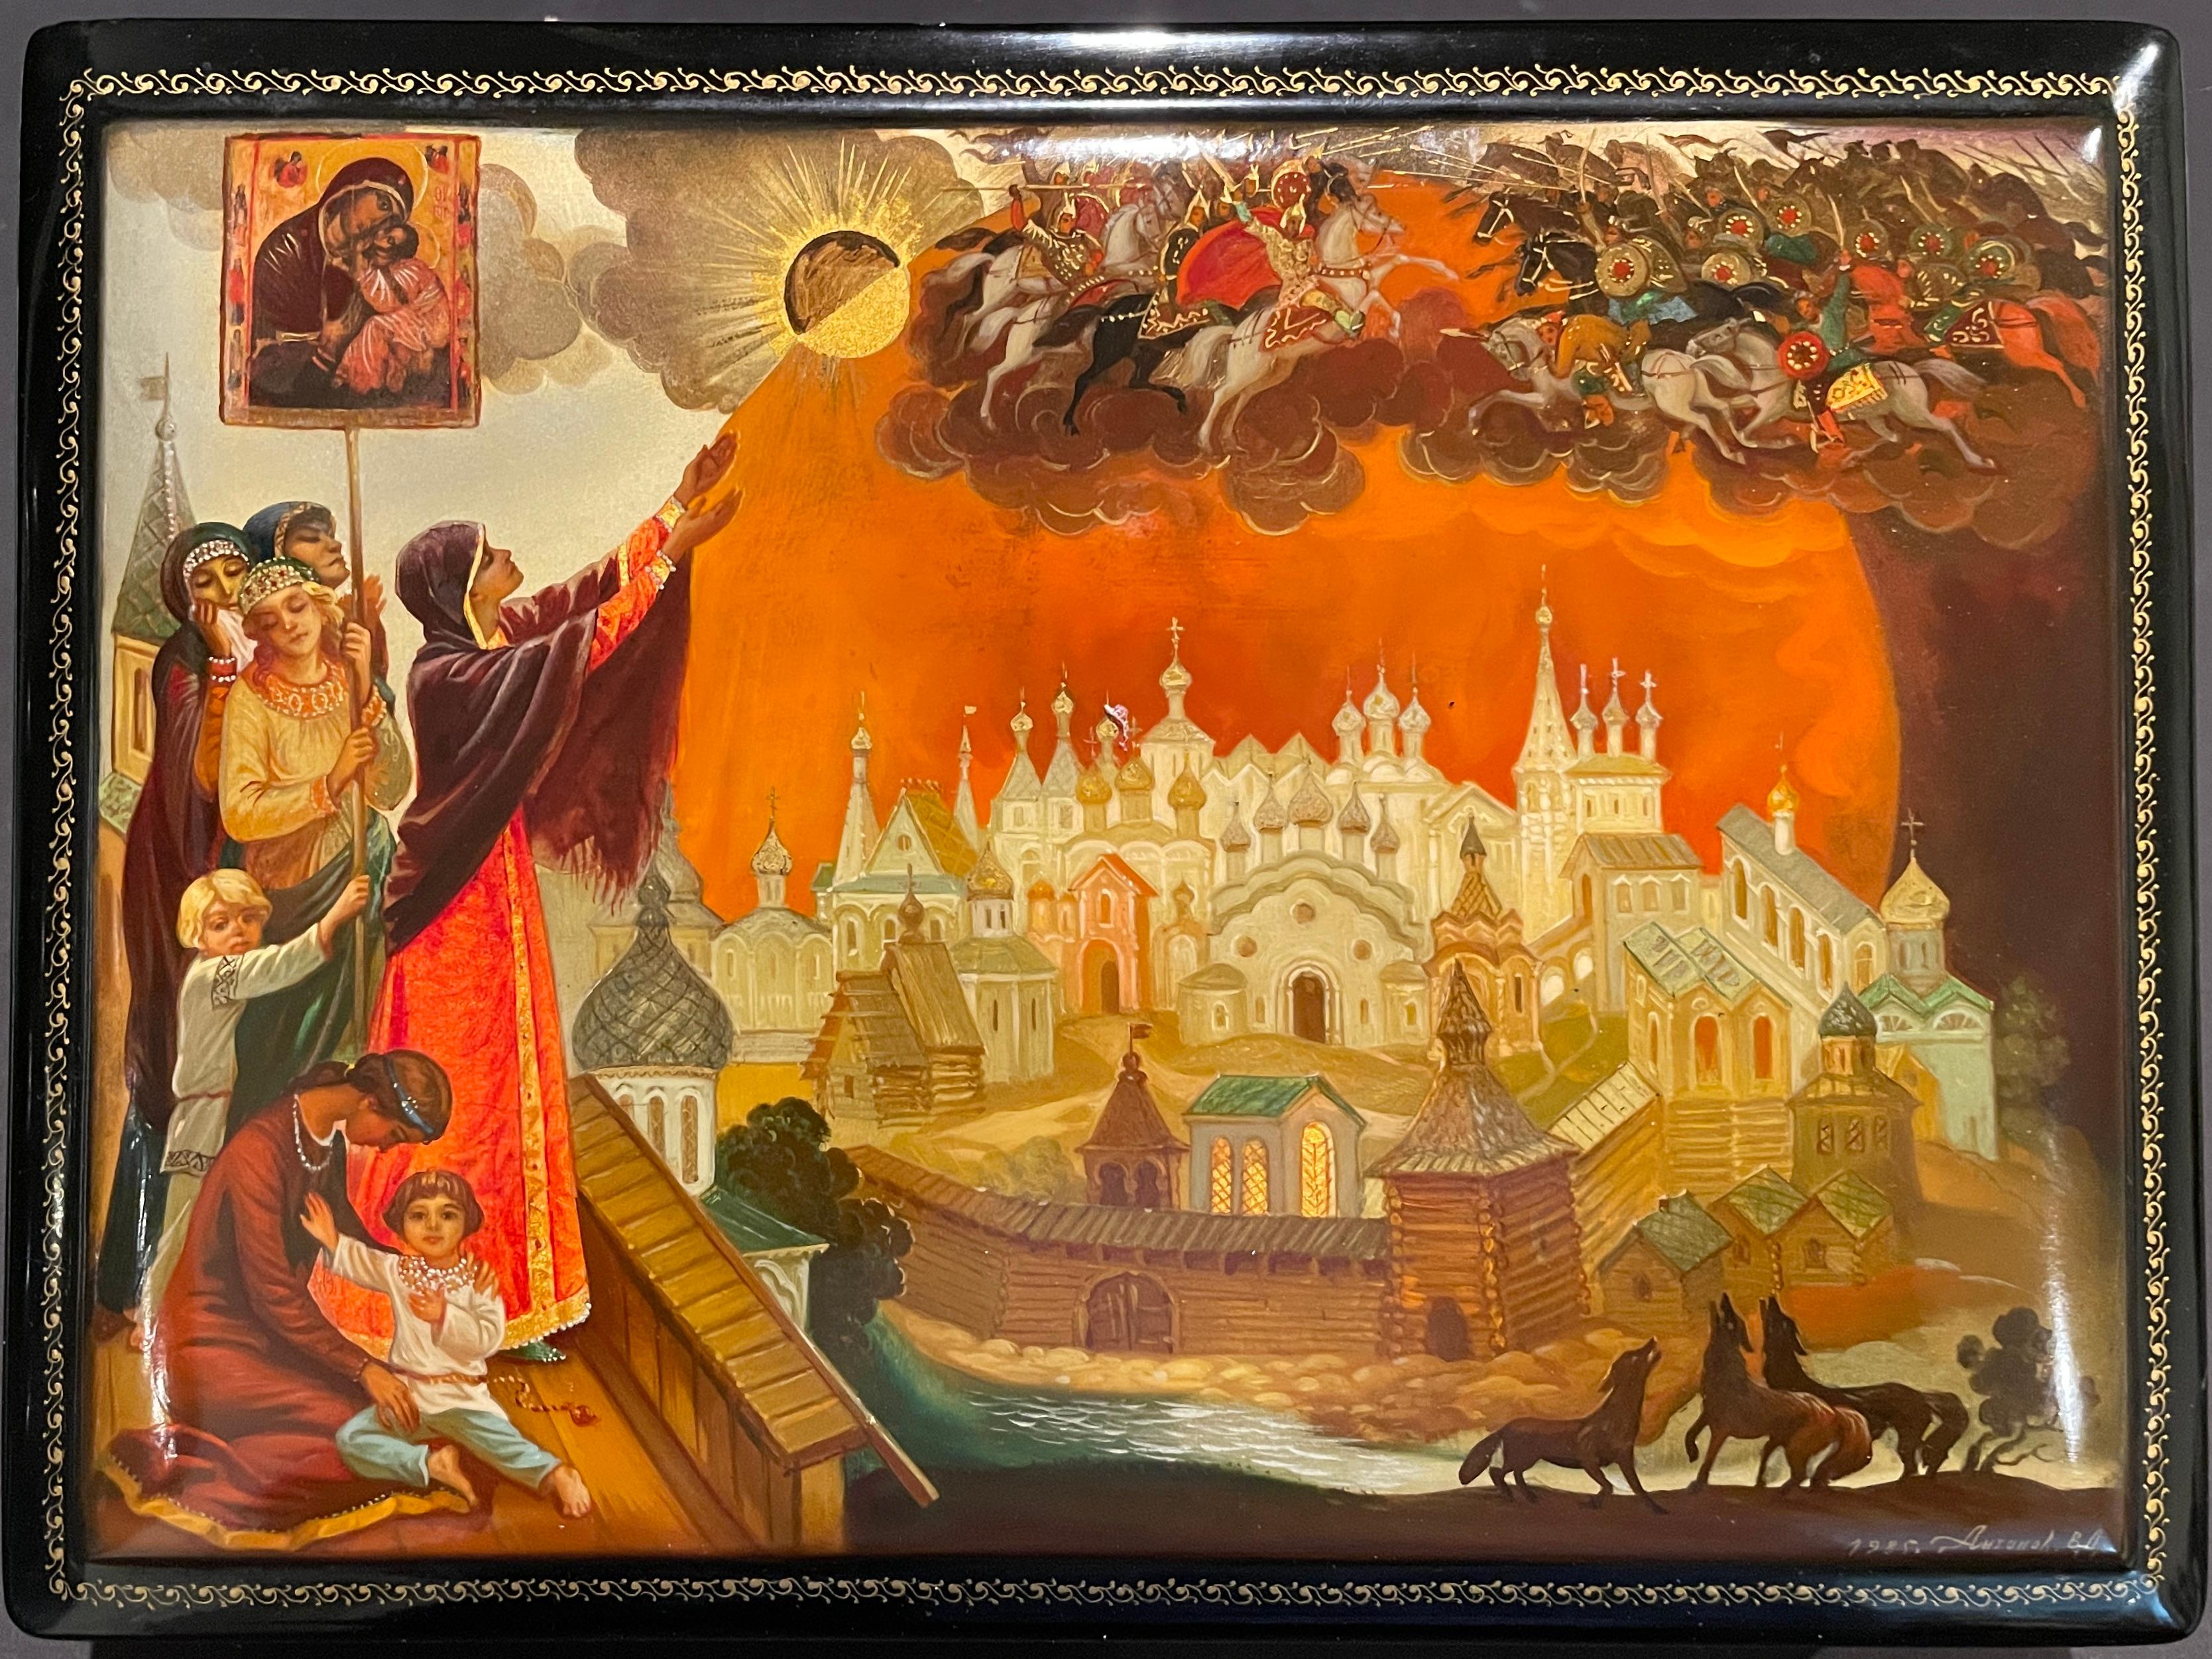 This exquisite Fedoskino, Russian black lacquered papier-mache box. Featuring a religious battle scene to protect the city with horses, prayers, icon women and children as well as wolves howling. Highest quality painting.The historic village of